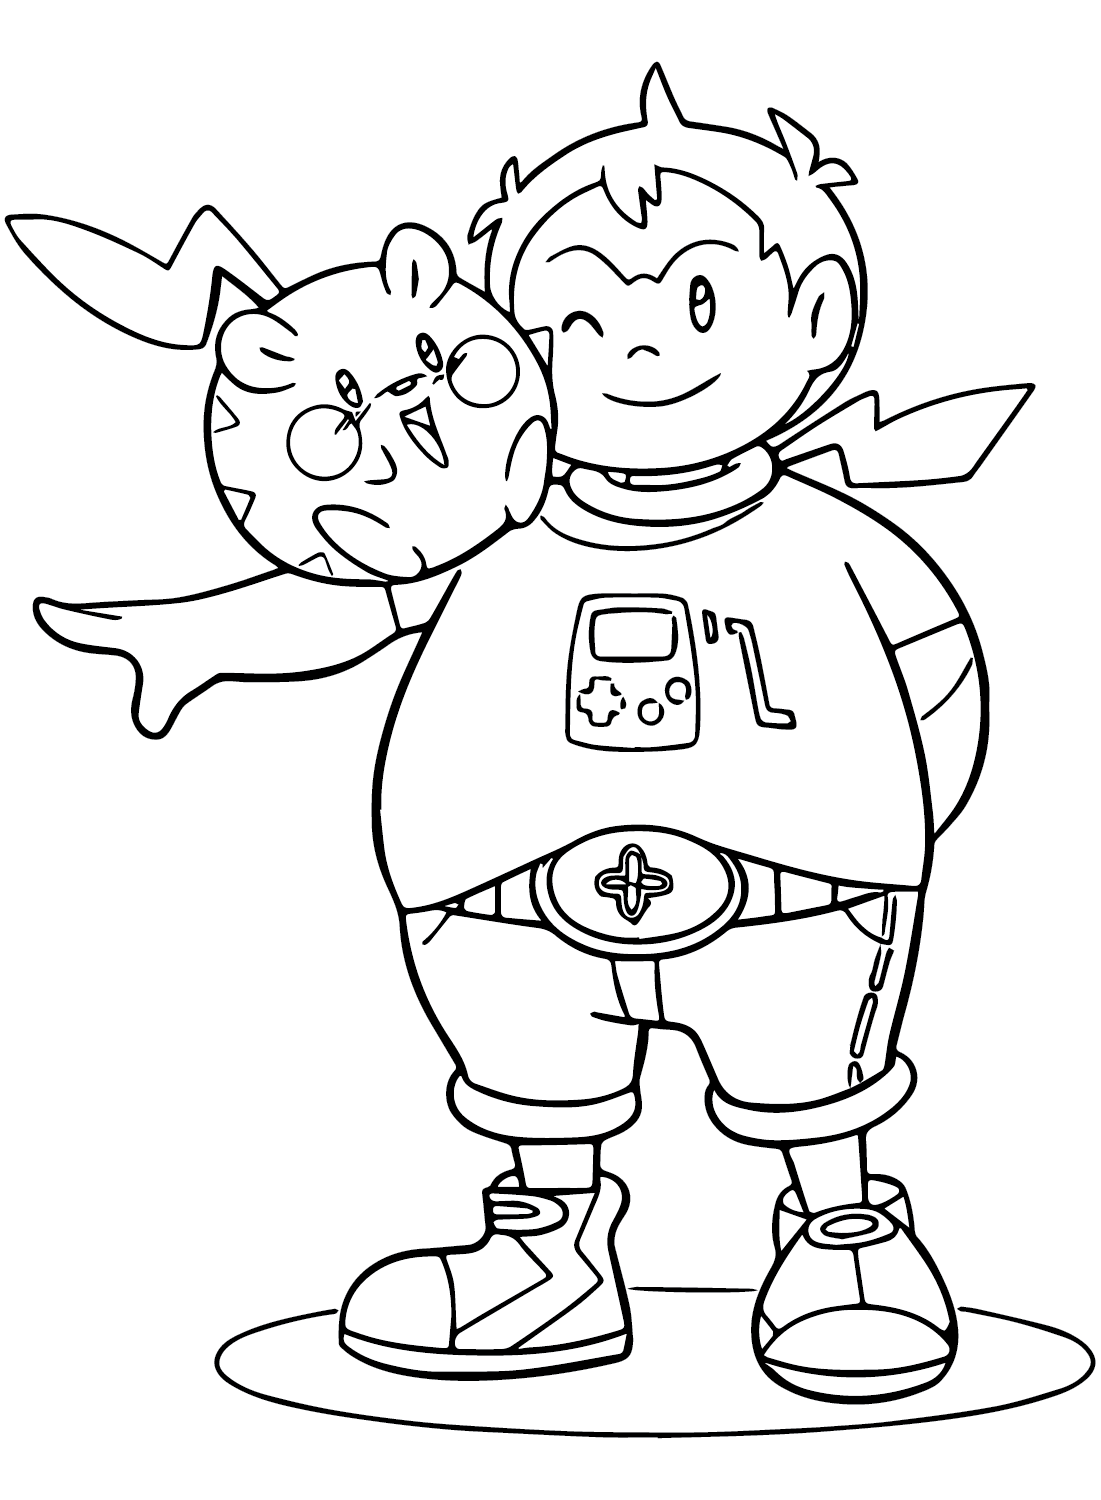 Sophocles, Togedemaru Pokemon Coloring Page to Print